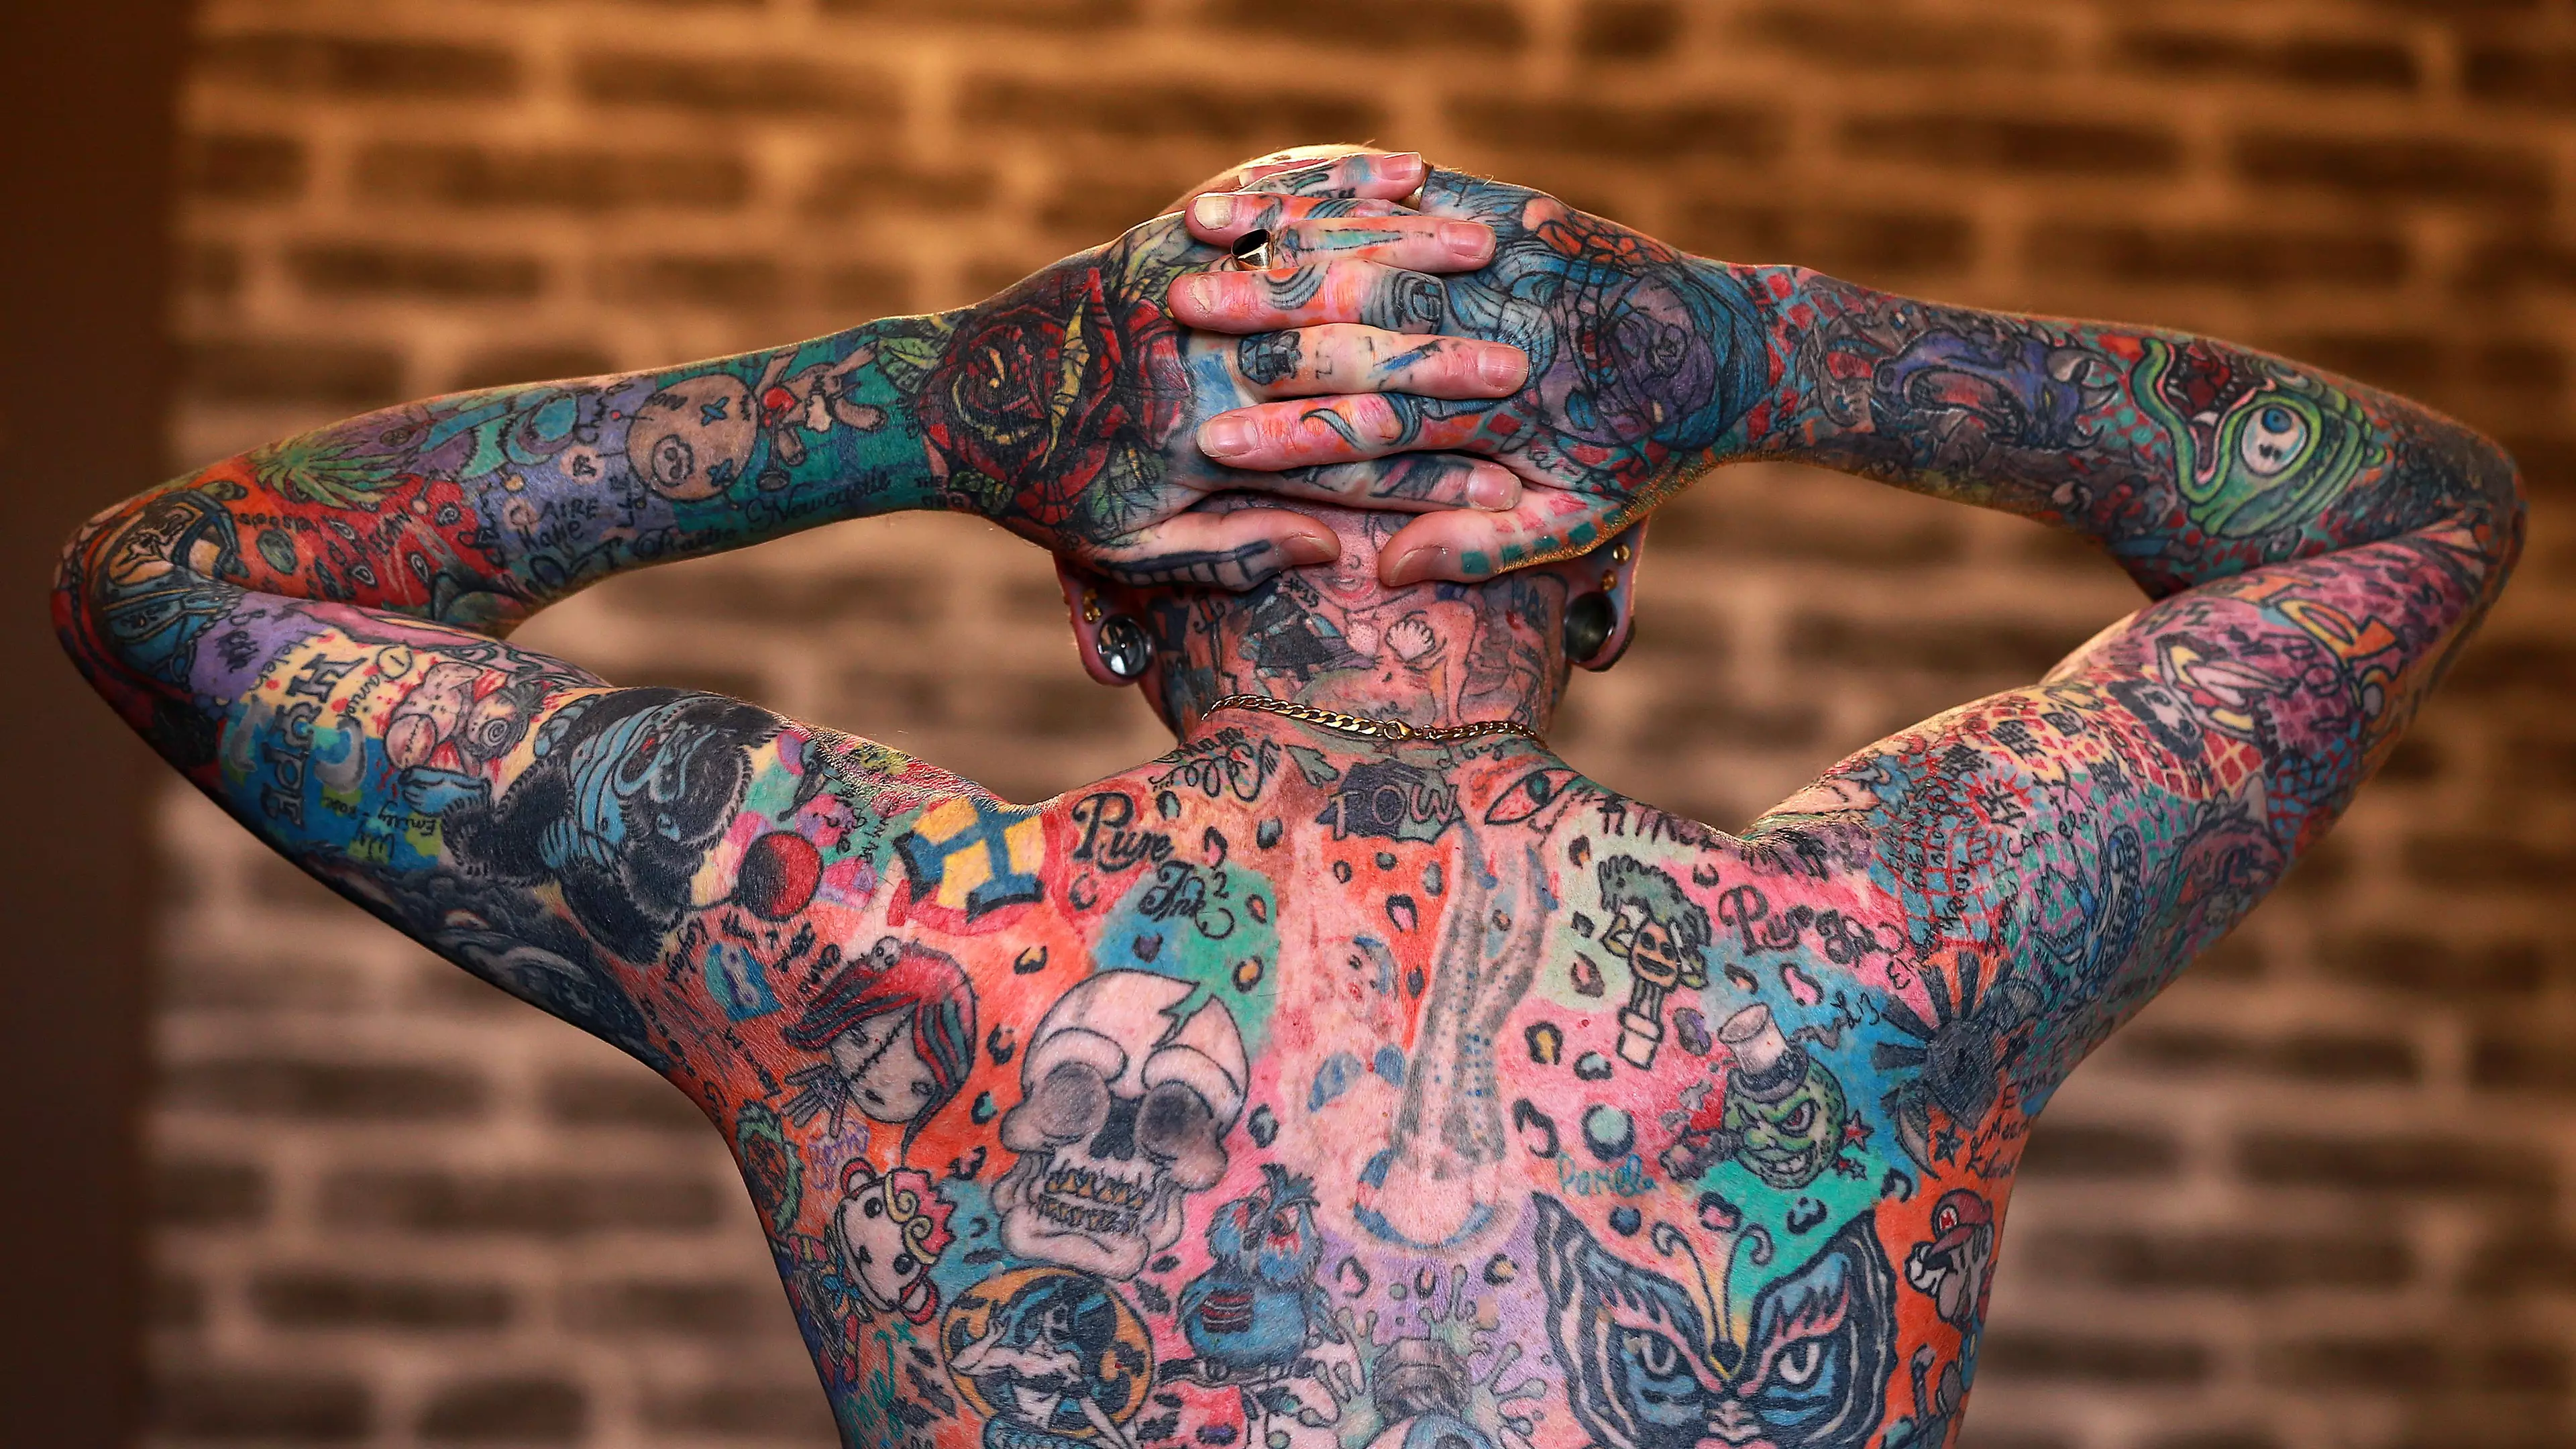 Man Who Spent £15,000 on Tattoos Even Inked His Own Privates 